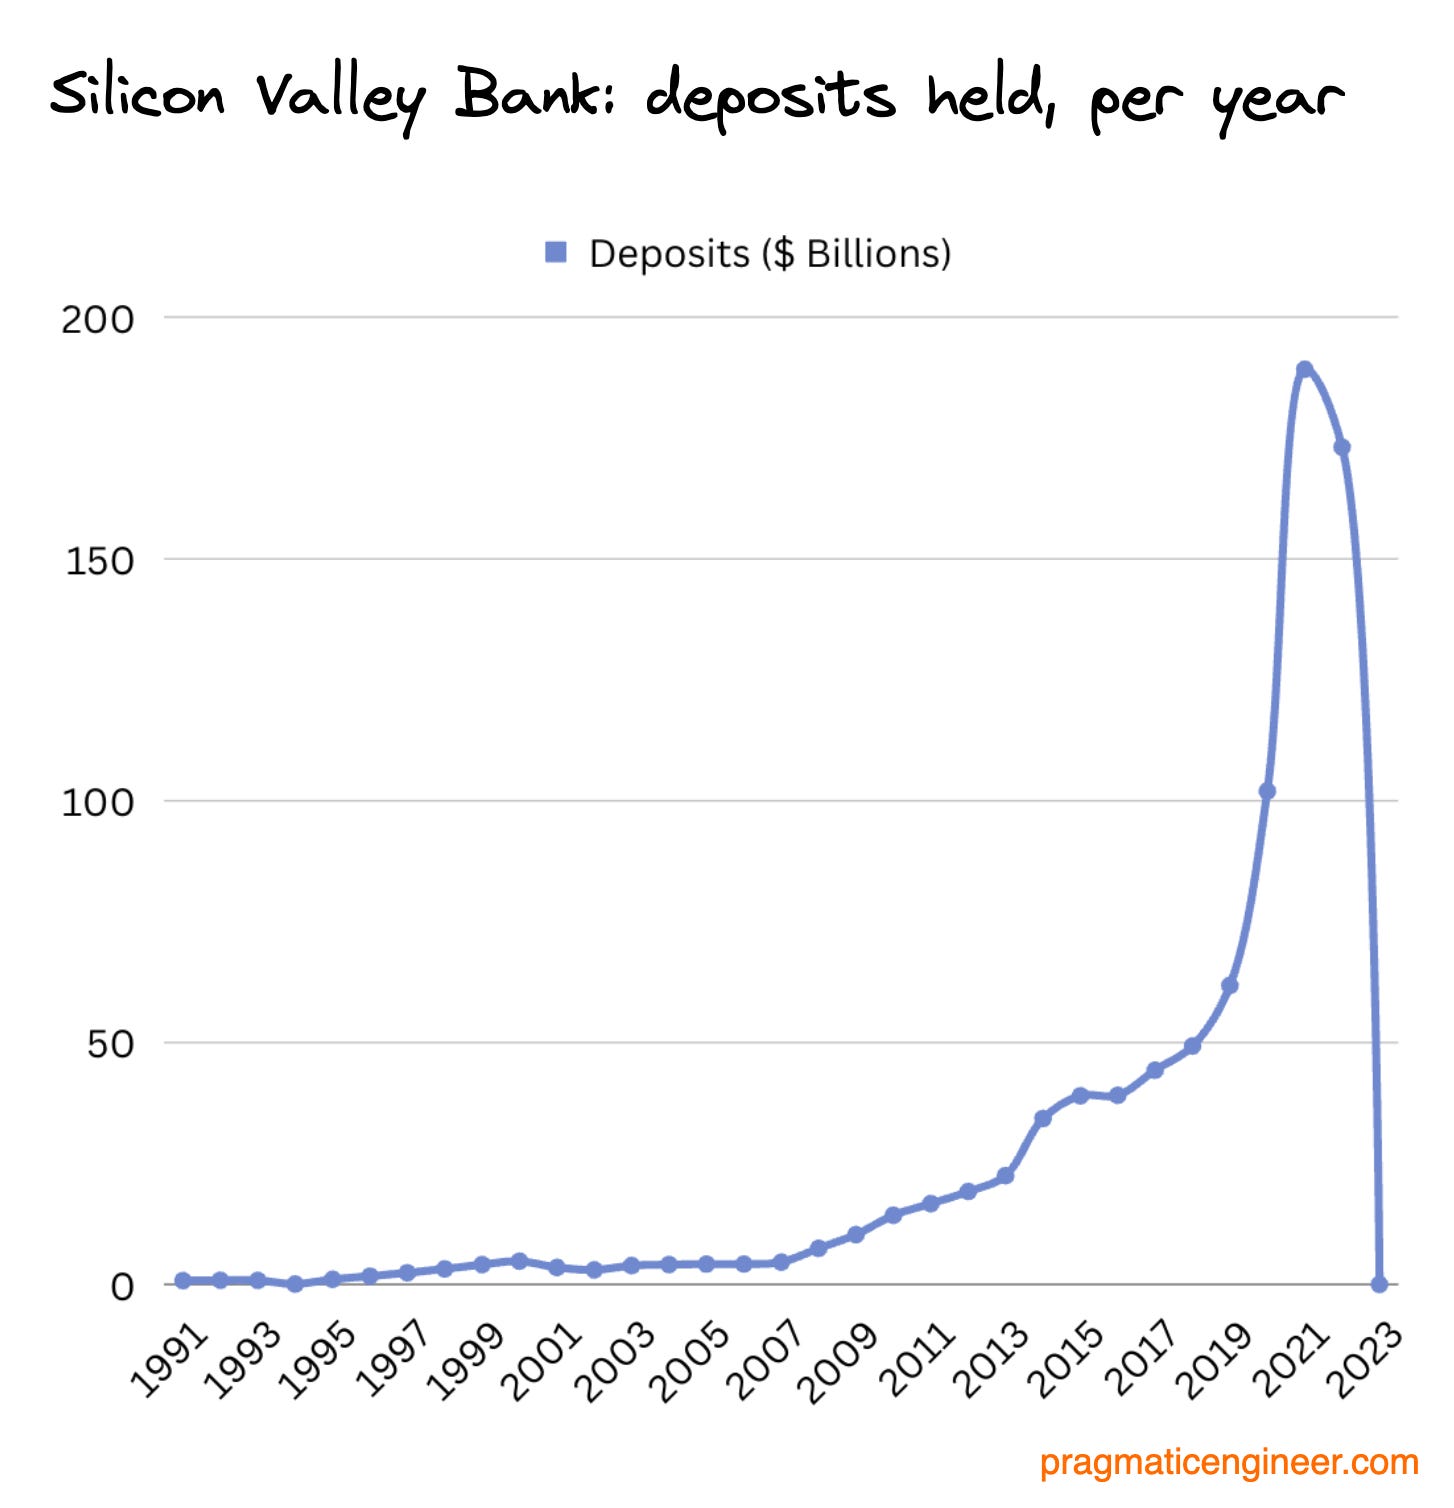 Deposits in Silicon Valley Bank, 1991-2023. The bank was founded in 1983. Source of data: Silicon Valley Bank public filings.